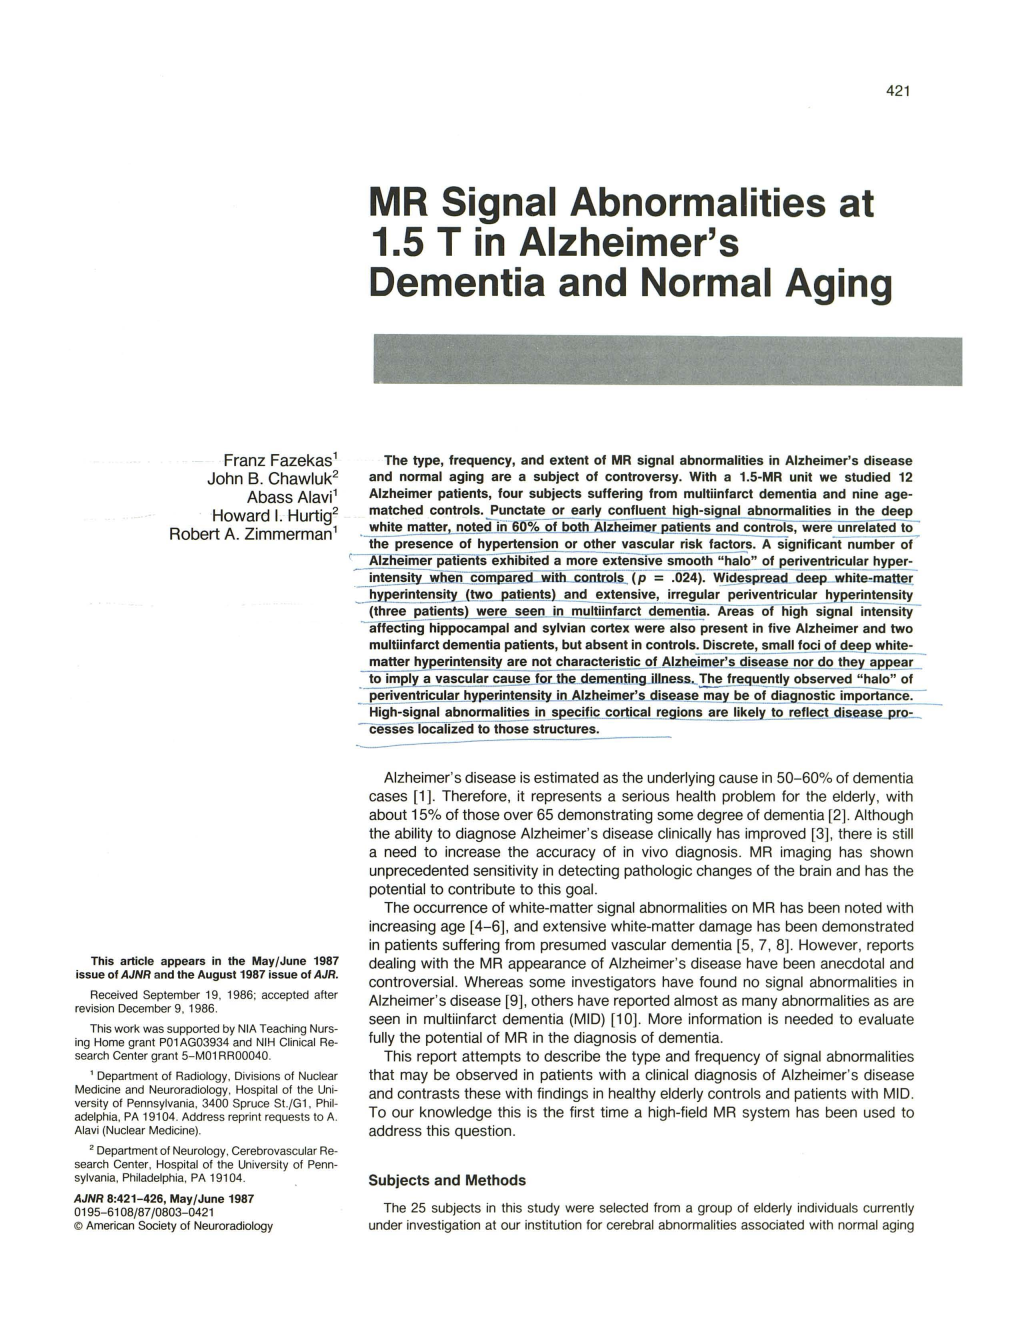 MR Signal Abnormalities at 1.5 T in Alzheimer's Dementia and Normal Aging